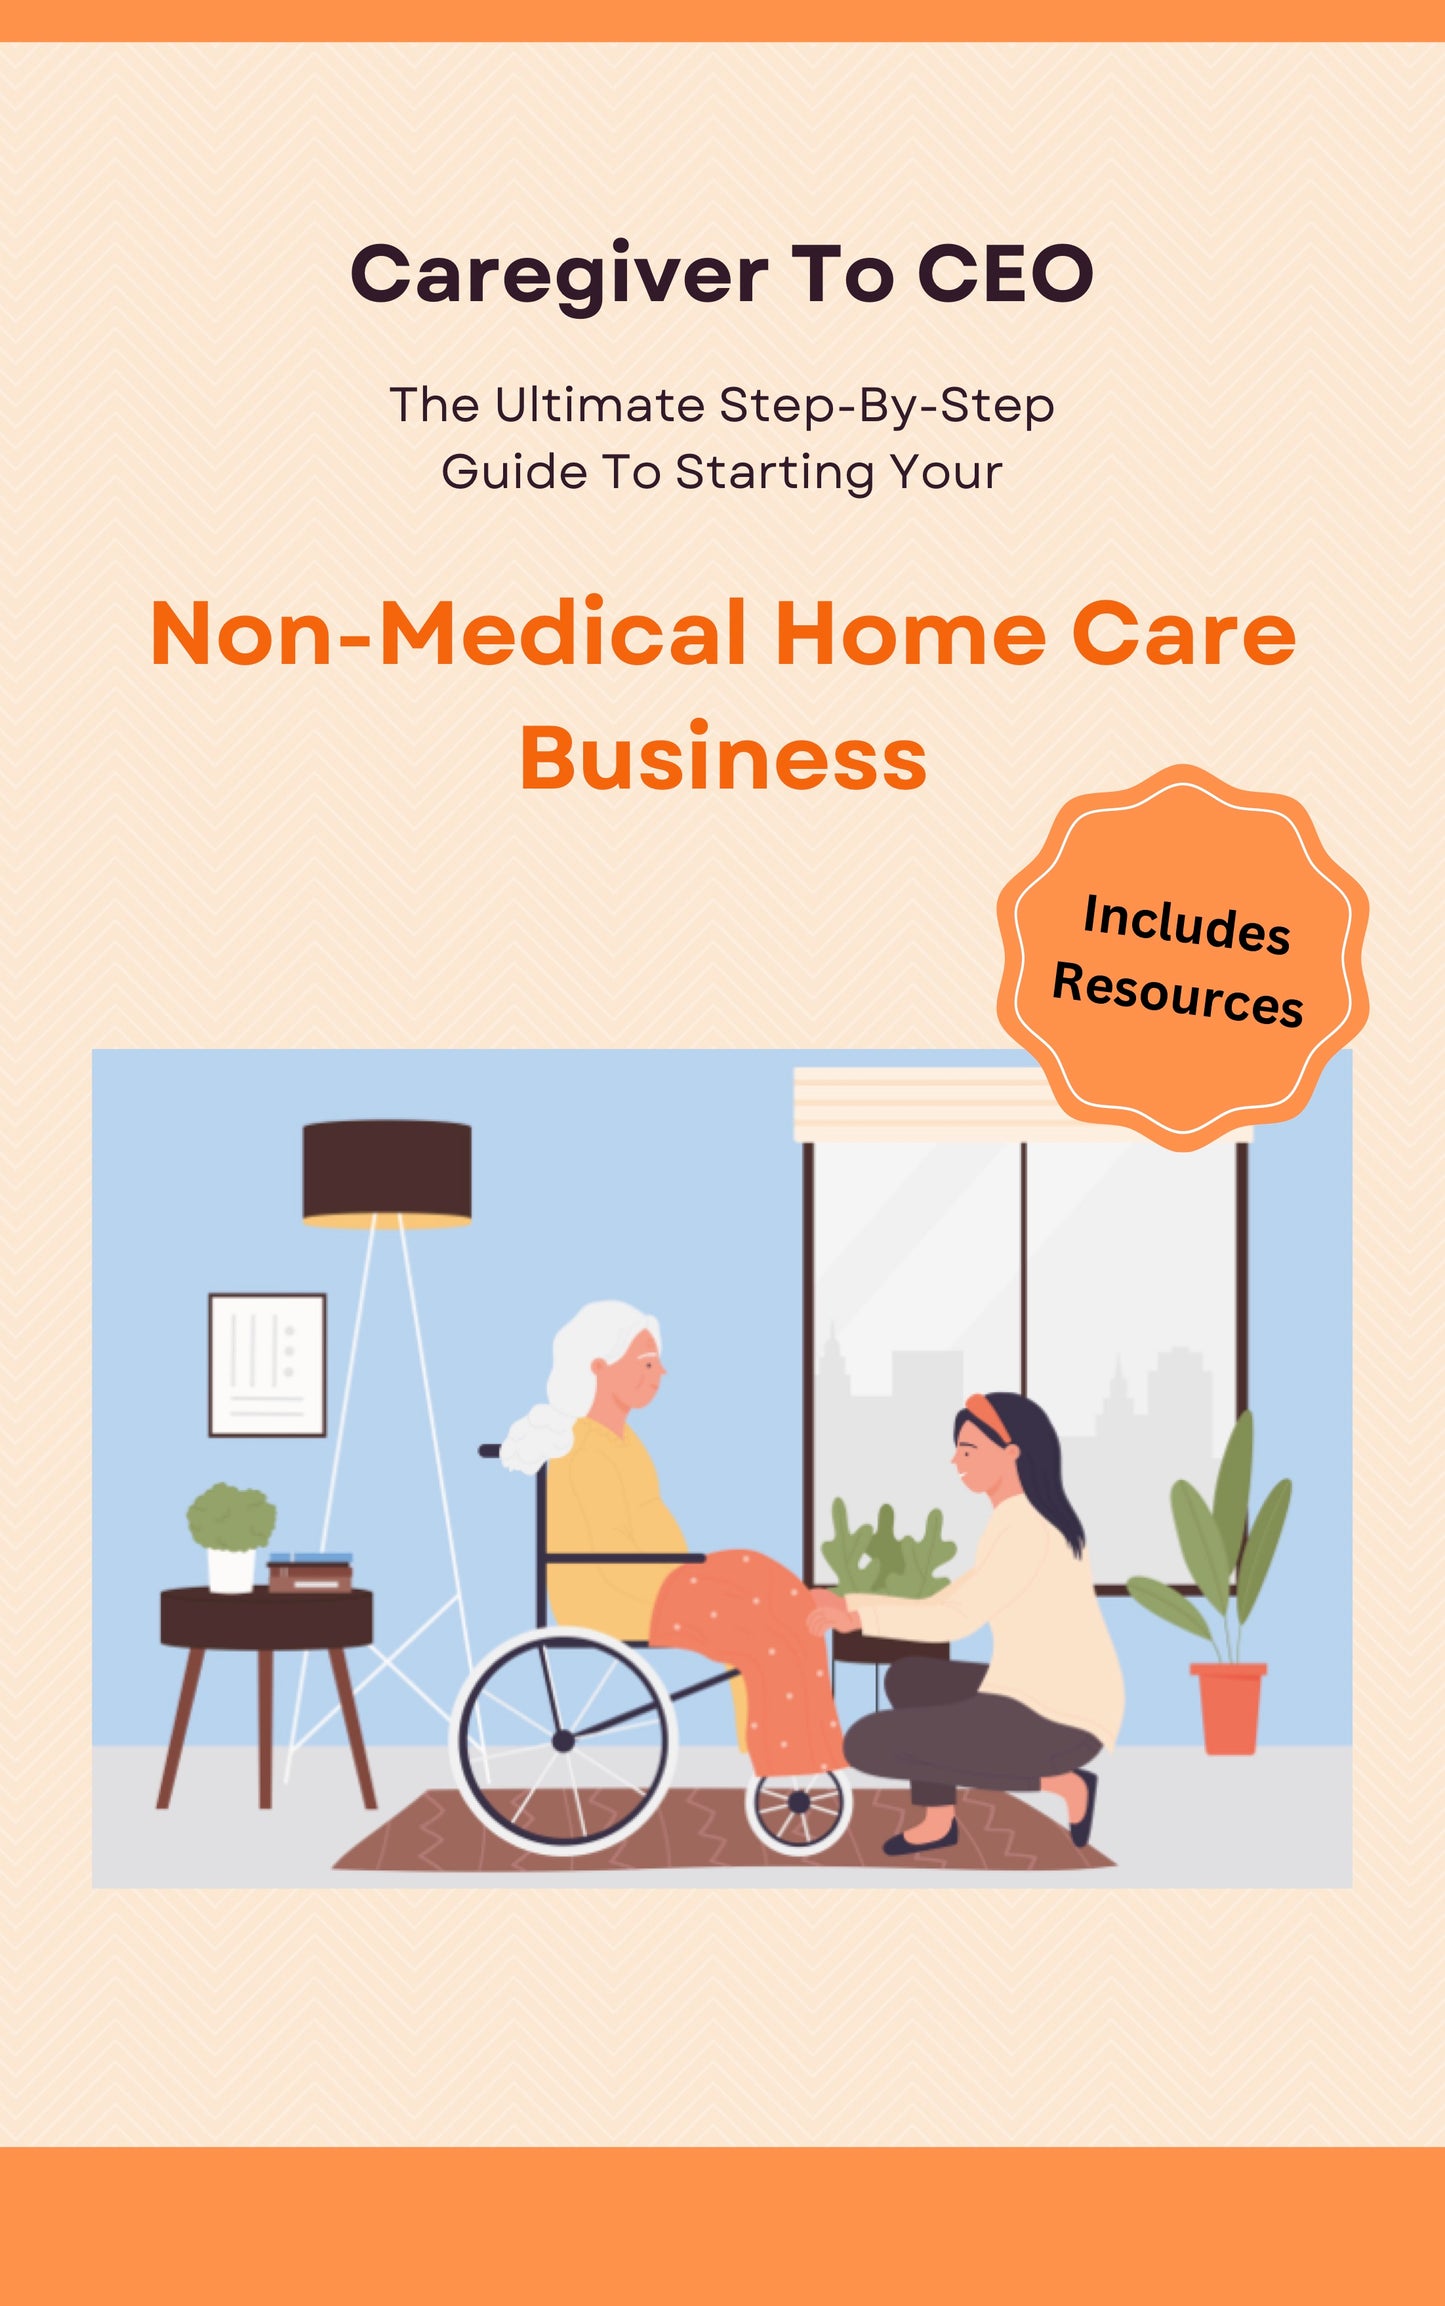 Caregiver To CEO: The Ultimate Step-By-Step Guide To Starting Your Non-Medical Home Care Business